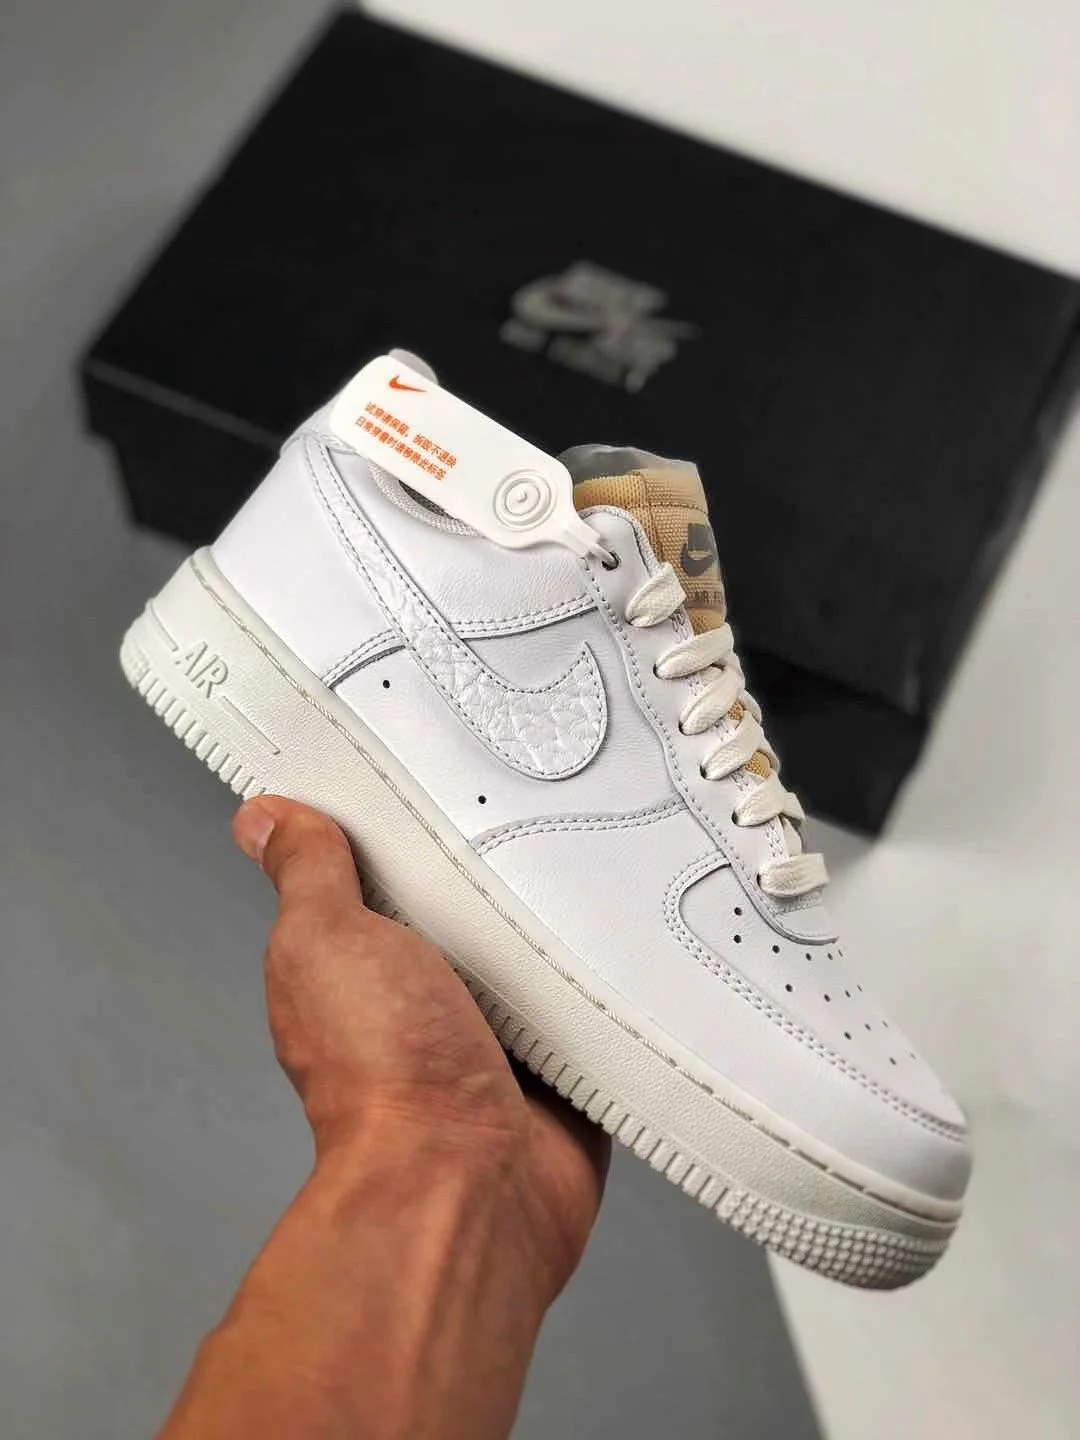 Nike Air Force 1 07 LX Low White Onyx CZ8101-100 For Sale